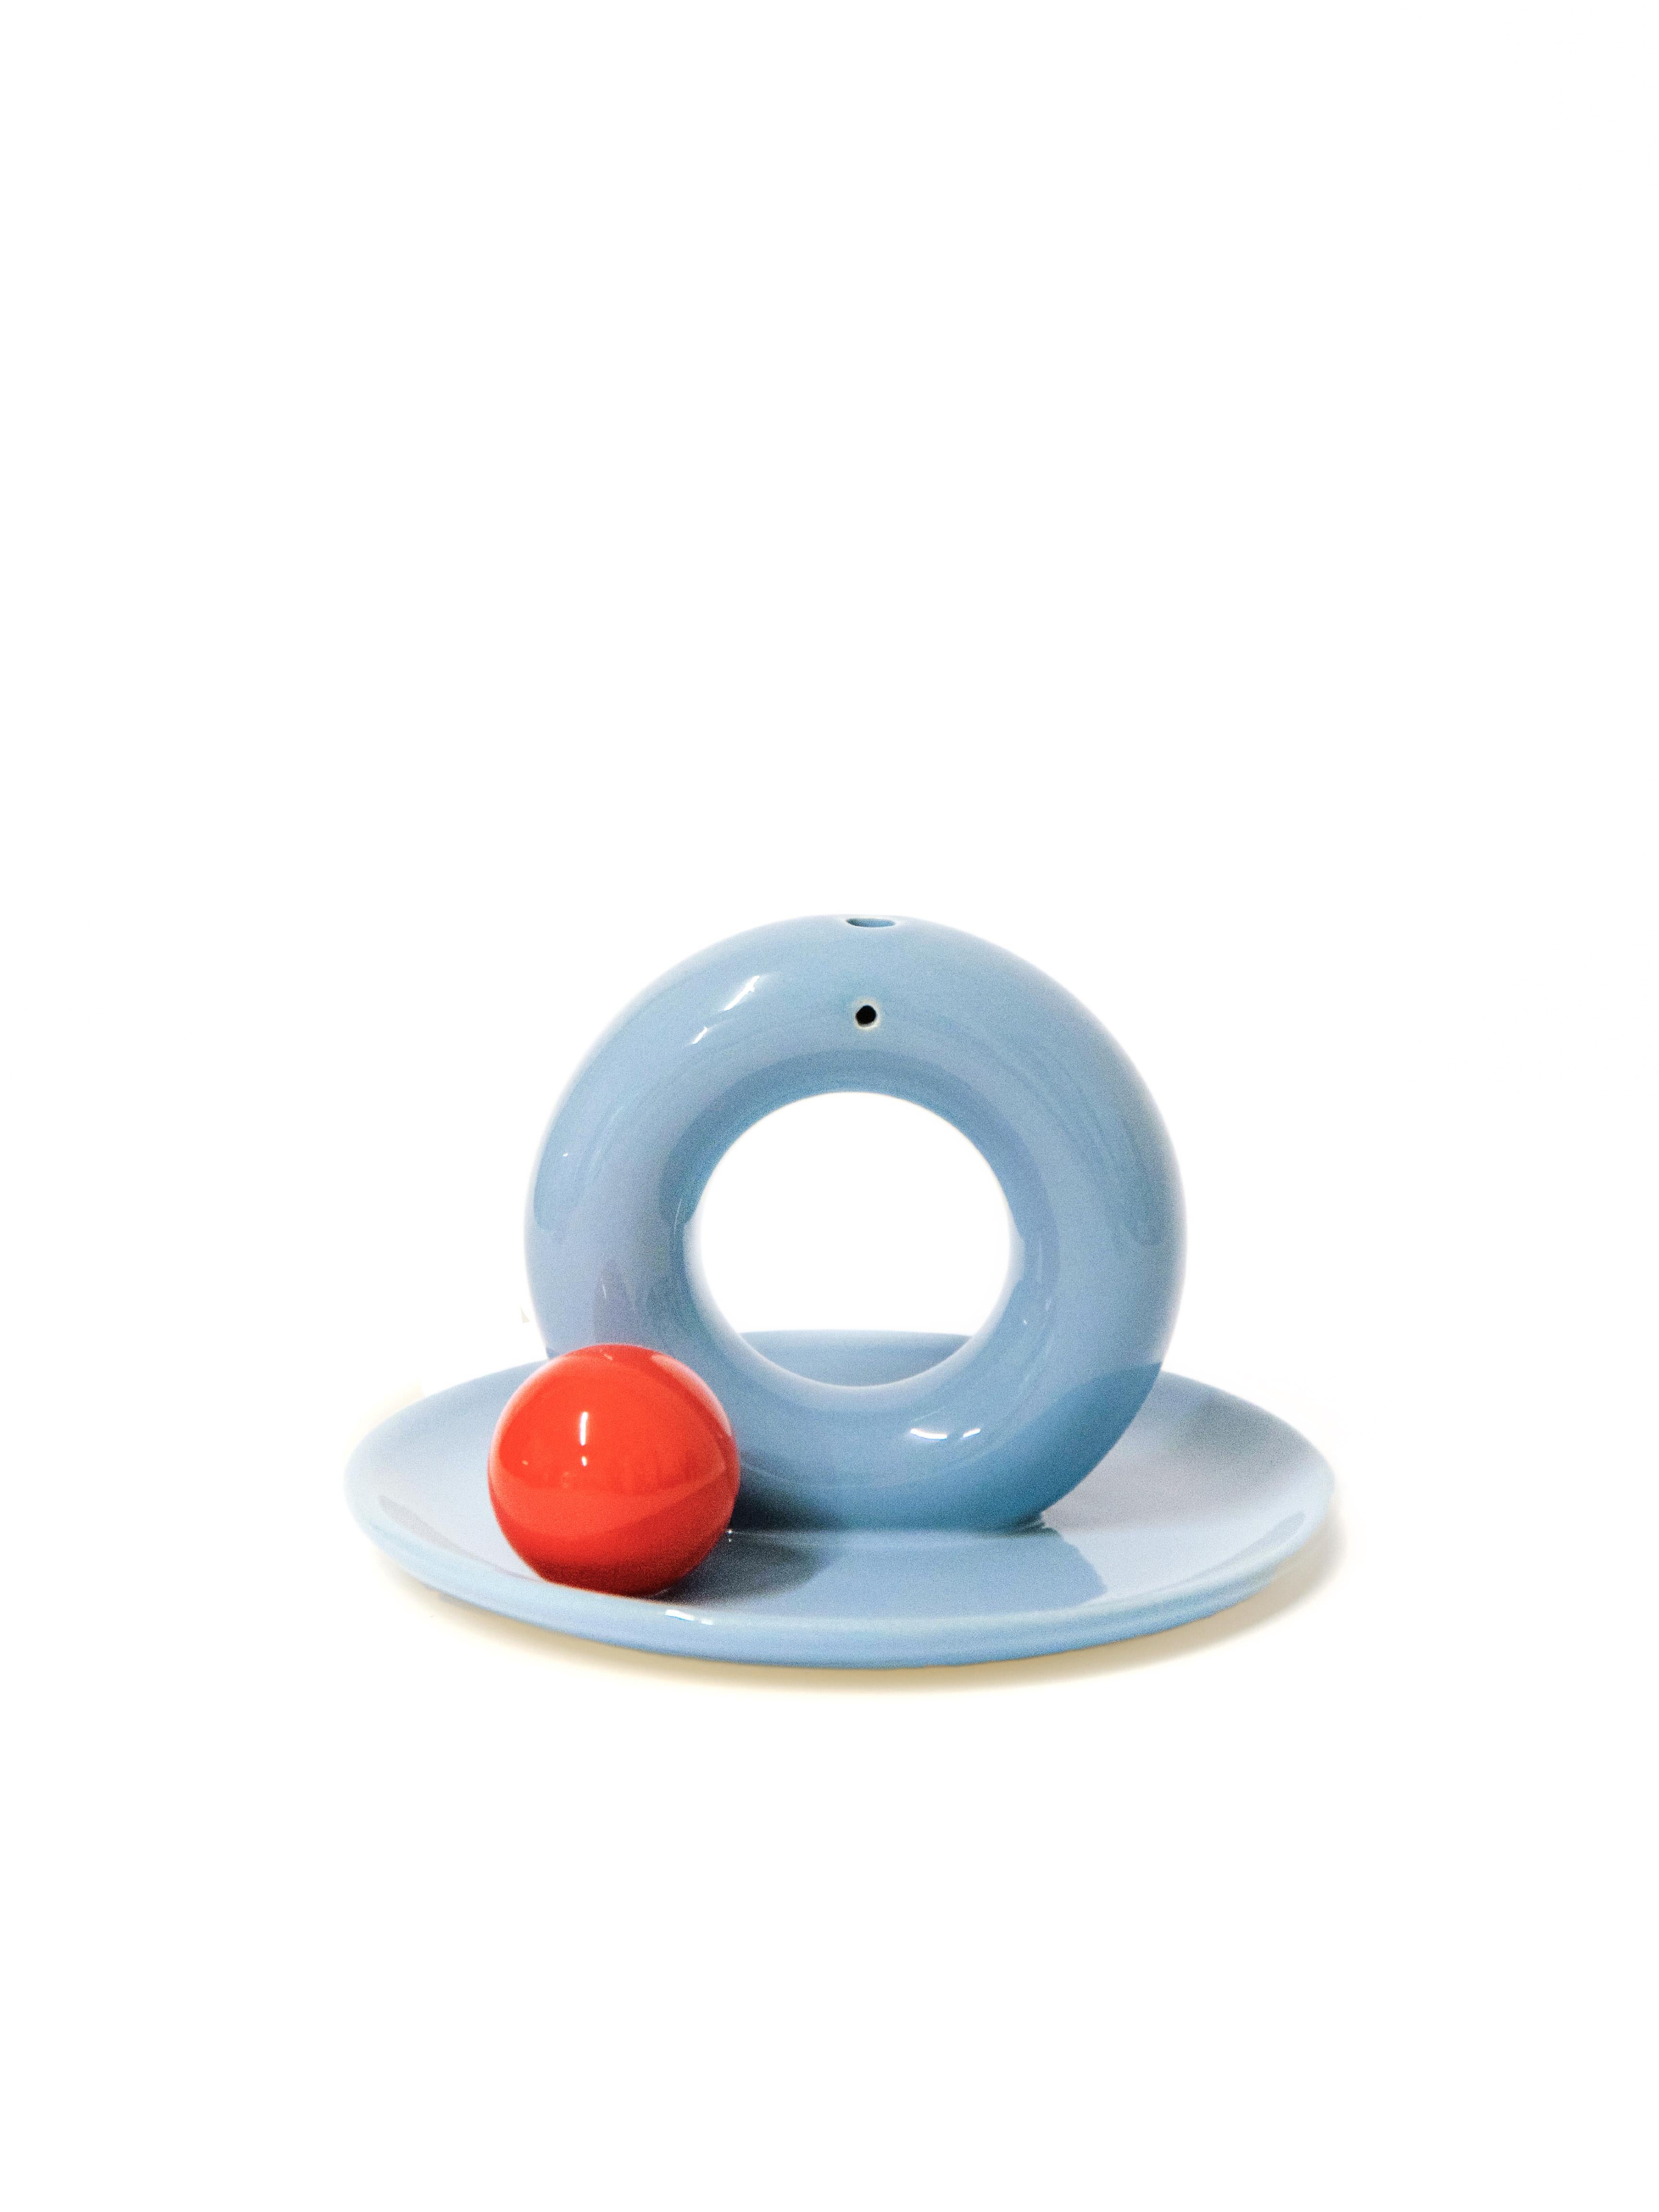 Aniela MINI is the answer to the need for a small item - a coaster that can be used to hold jewelry, sweets or burn incense sticks.


Denim blue platter
Red ball

ø 15 cm
two holes for incense 